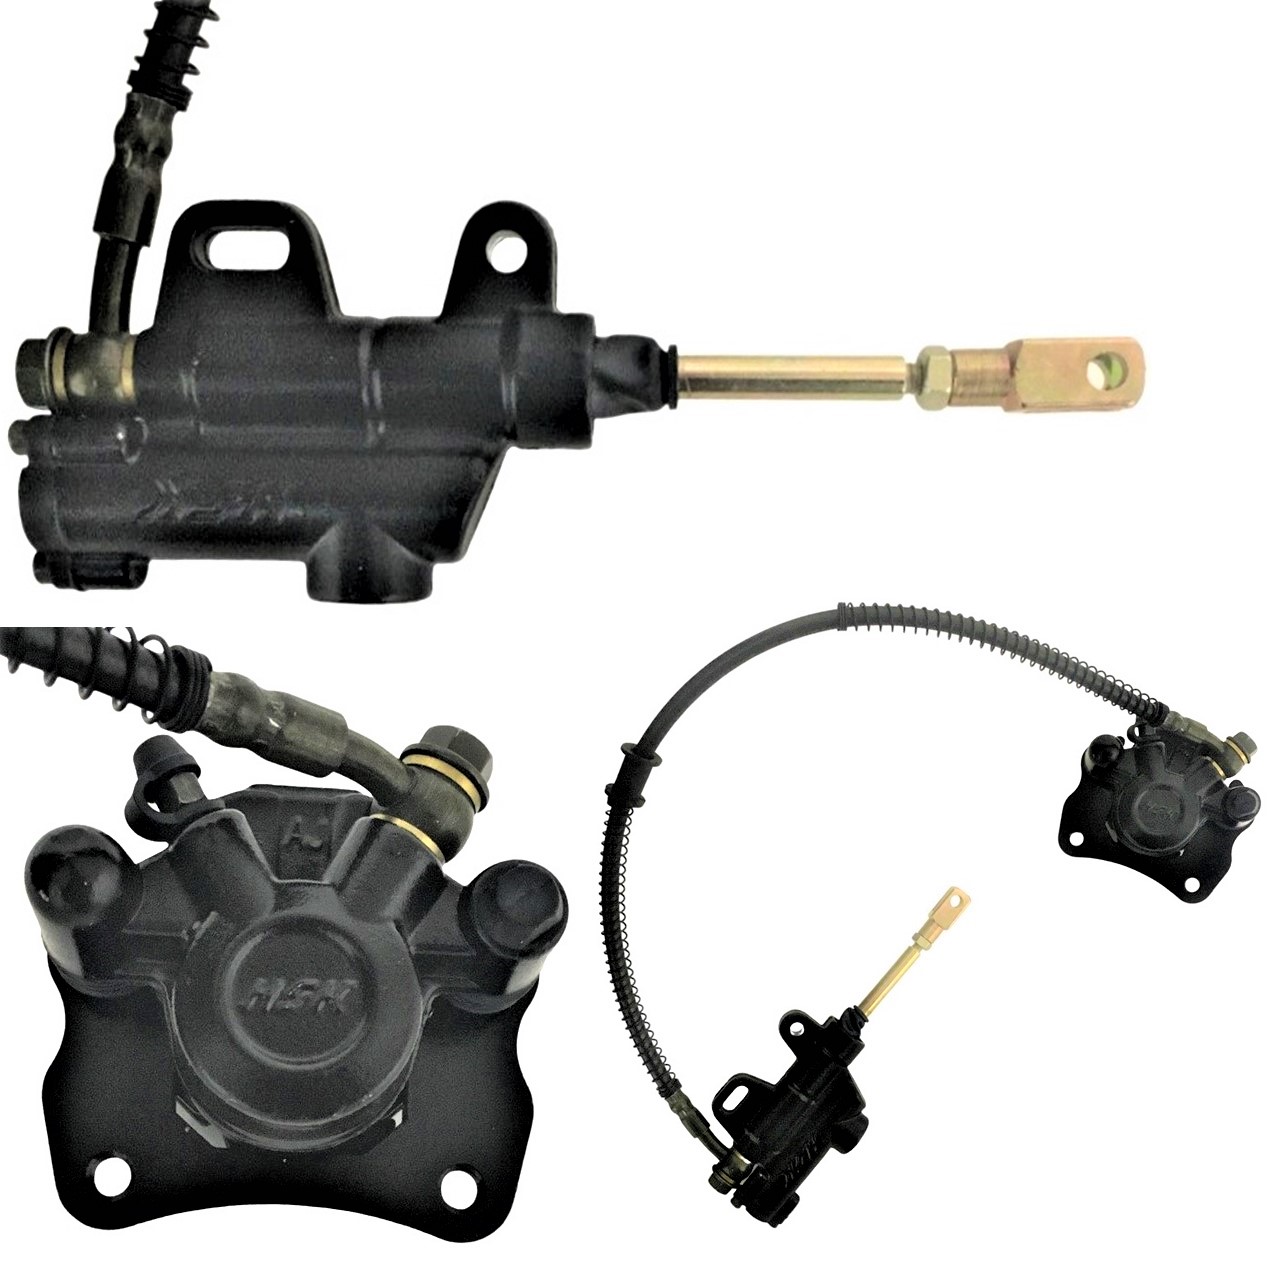 REAR FOOT BRAKE ASSEMBLY Crt Bolt to End of Arm L=84mm Line L=22" Caliper Bolts c/c=62mm Master Cylinder bolts c/c 40-50mm Rod Length from Base to Center of Connector Pin = 90mm - Click Image to Close